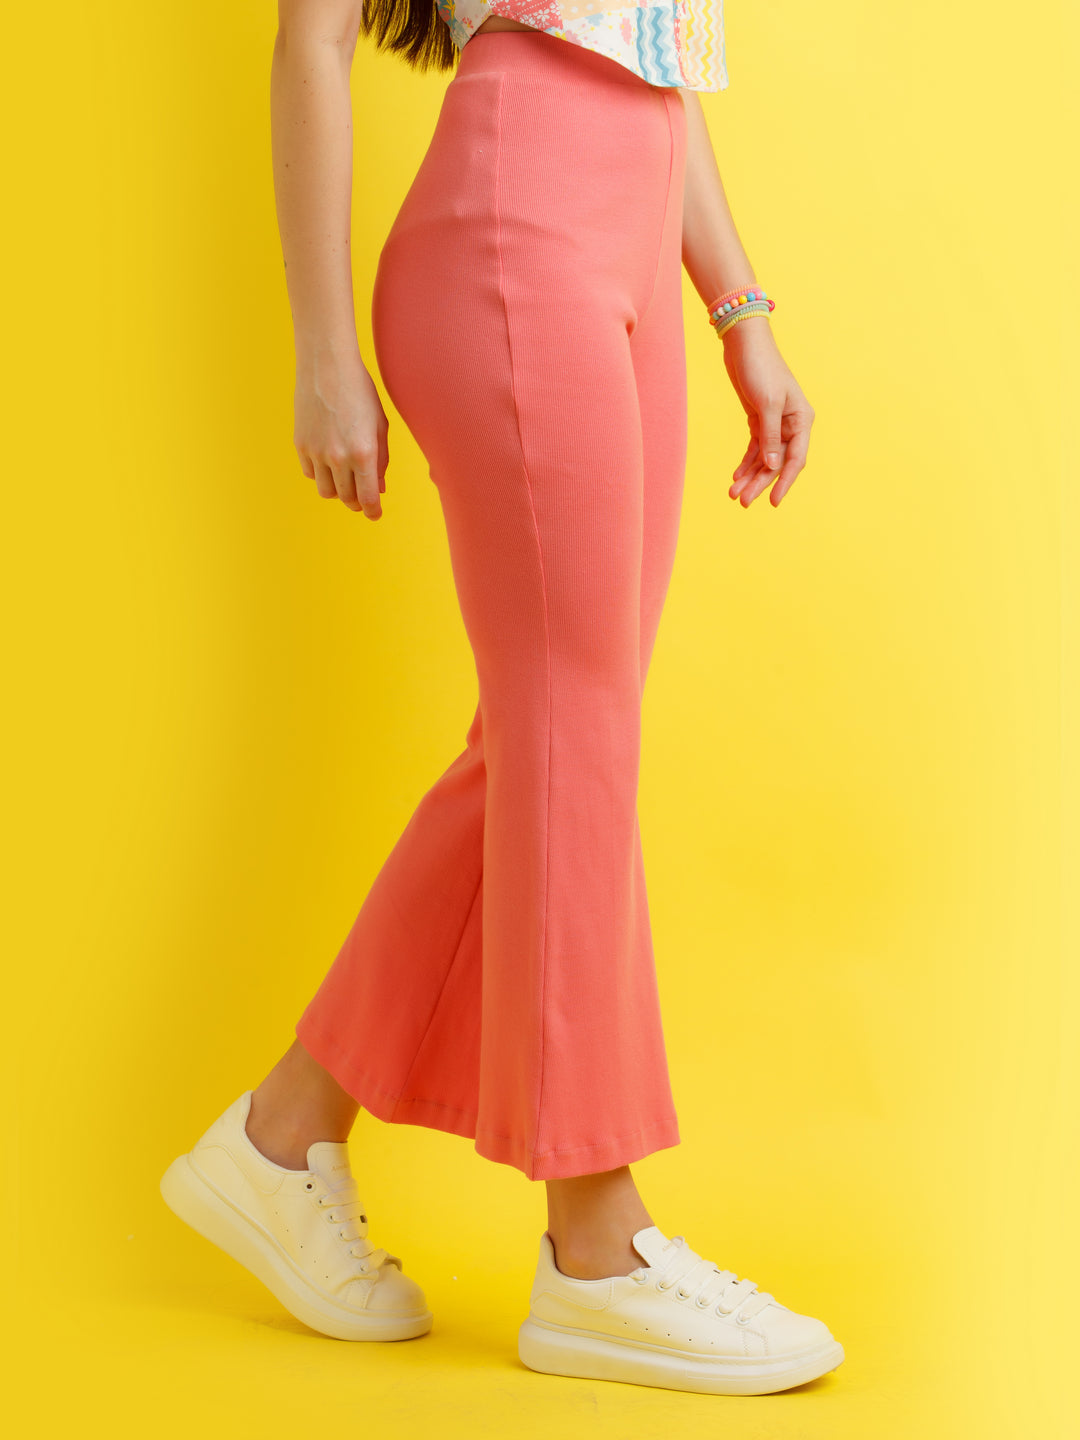 Pink Solid Pants For Women